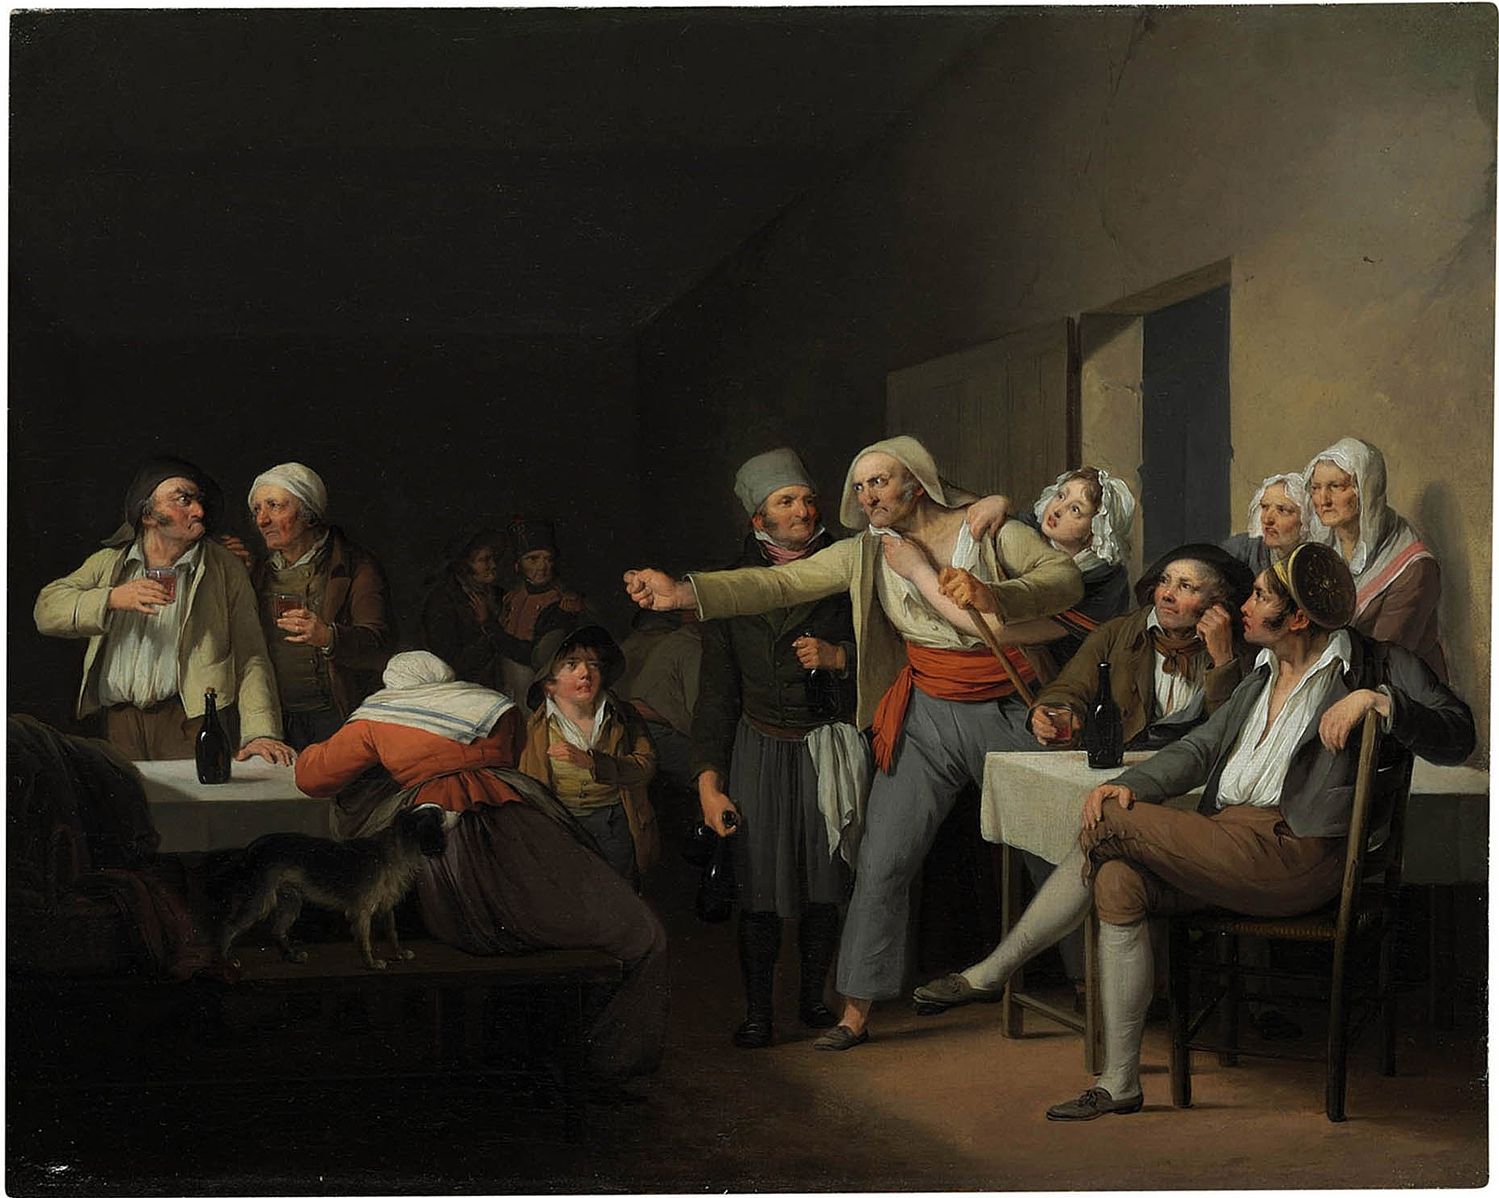 Boilly 1818-_Les_Hommes_se_disputent coll privee